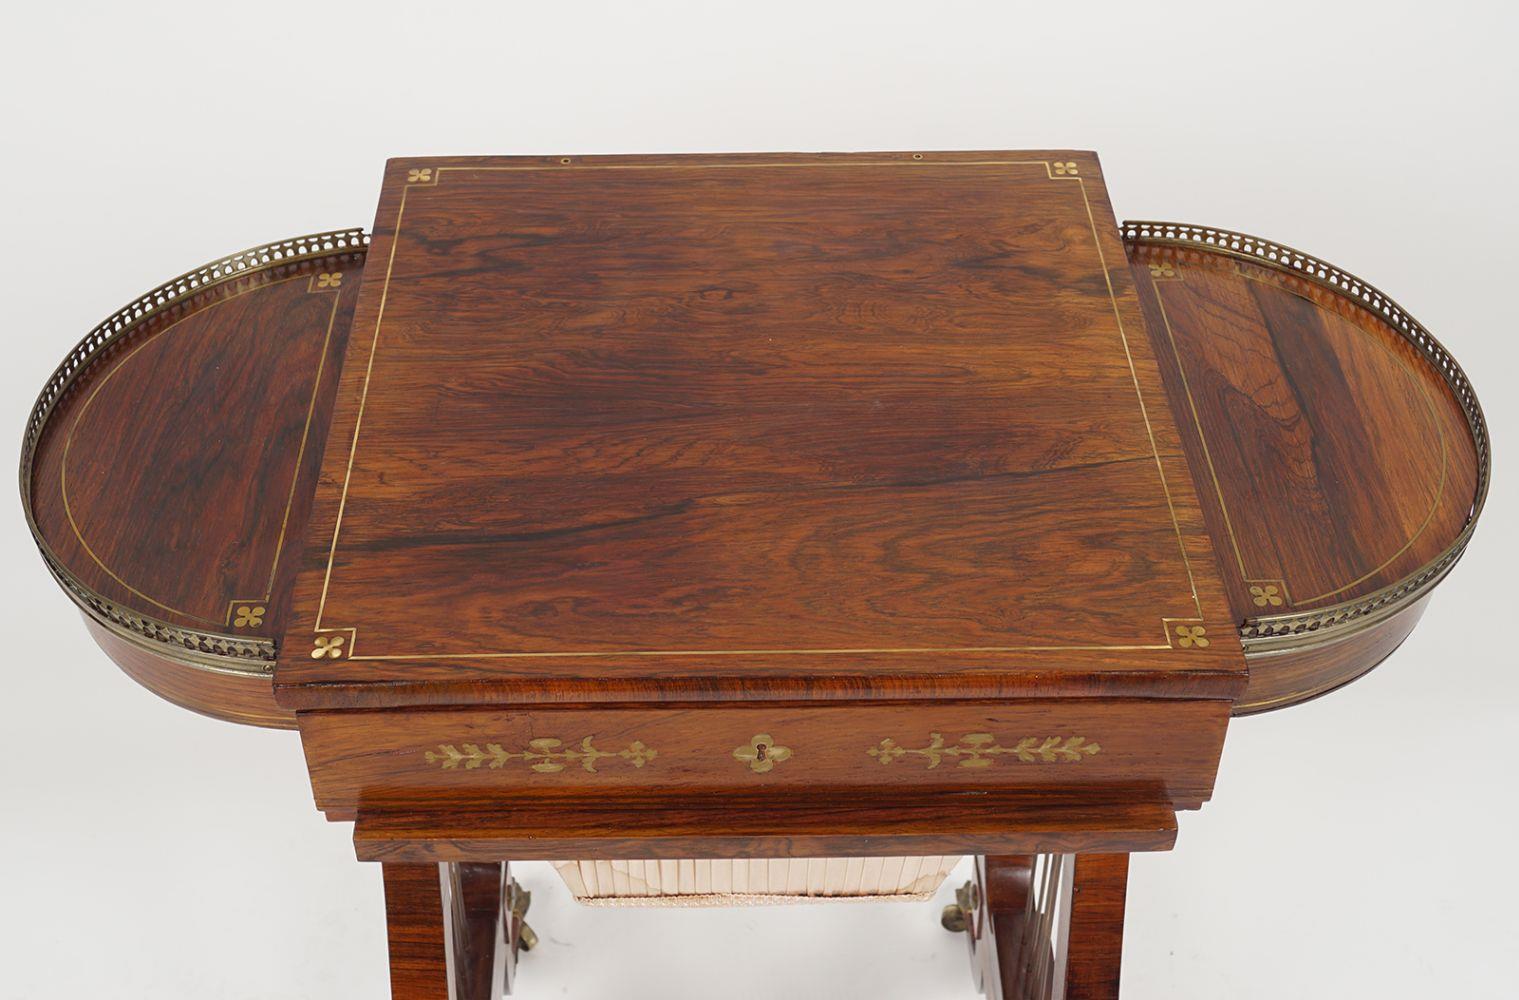 REGENCY BRASS INLAID GAMES TABLE - Image 2 of 5